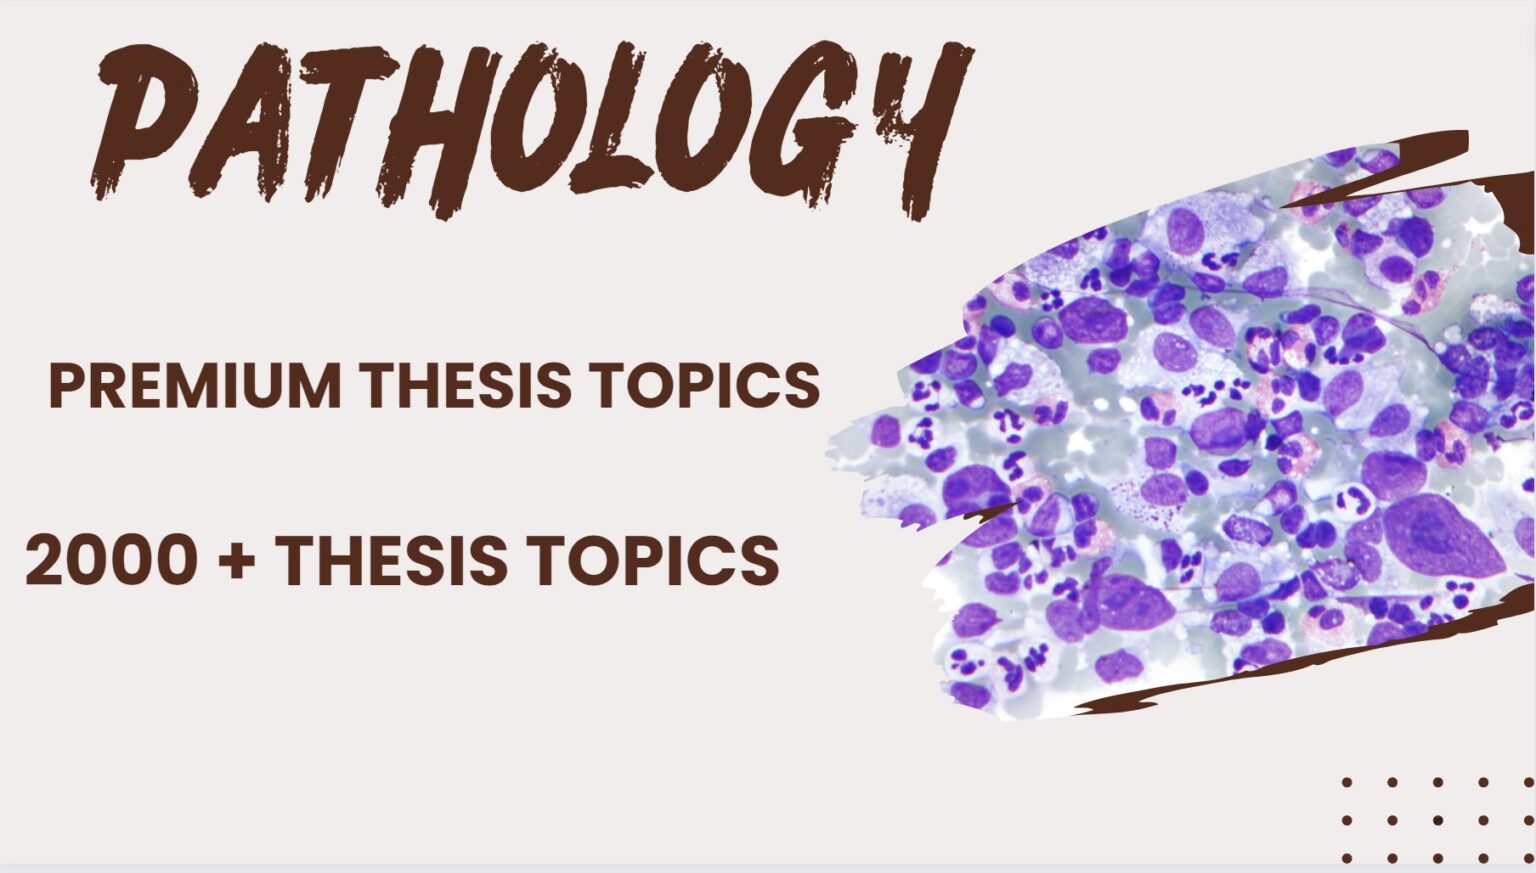 topics of thesis in pathology